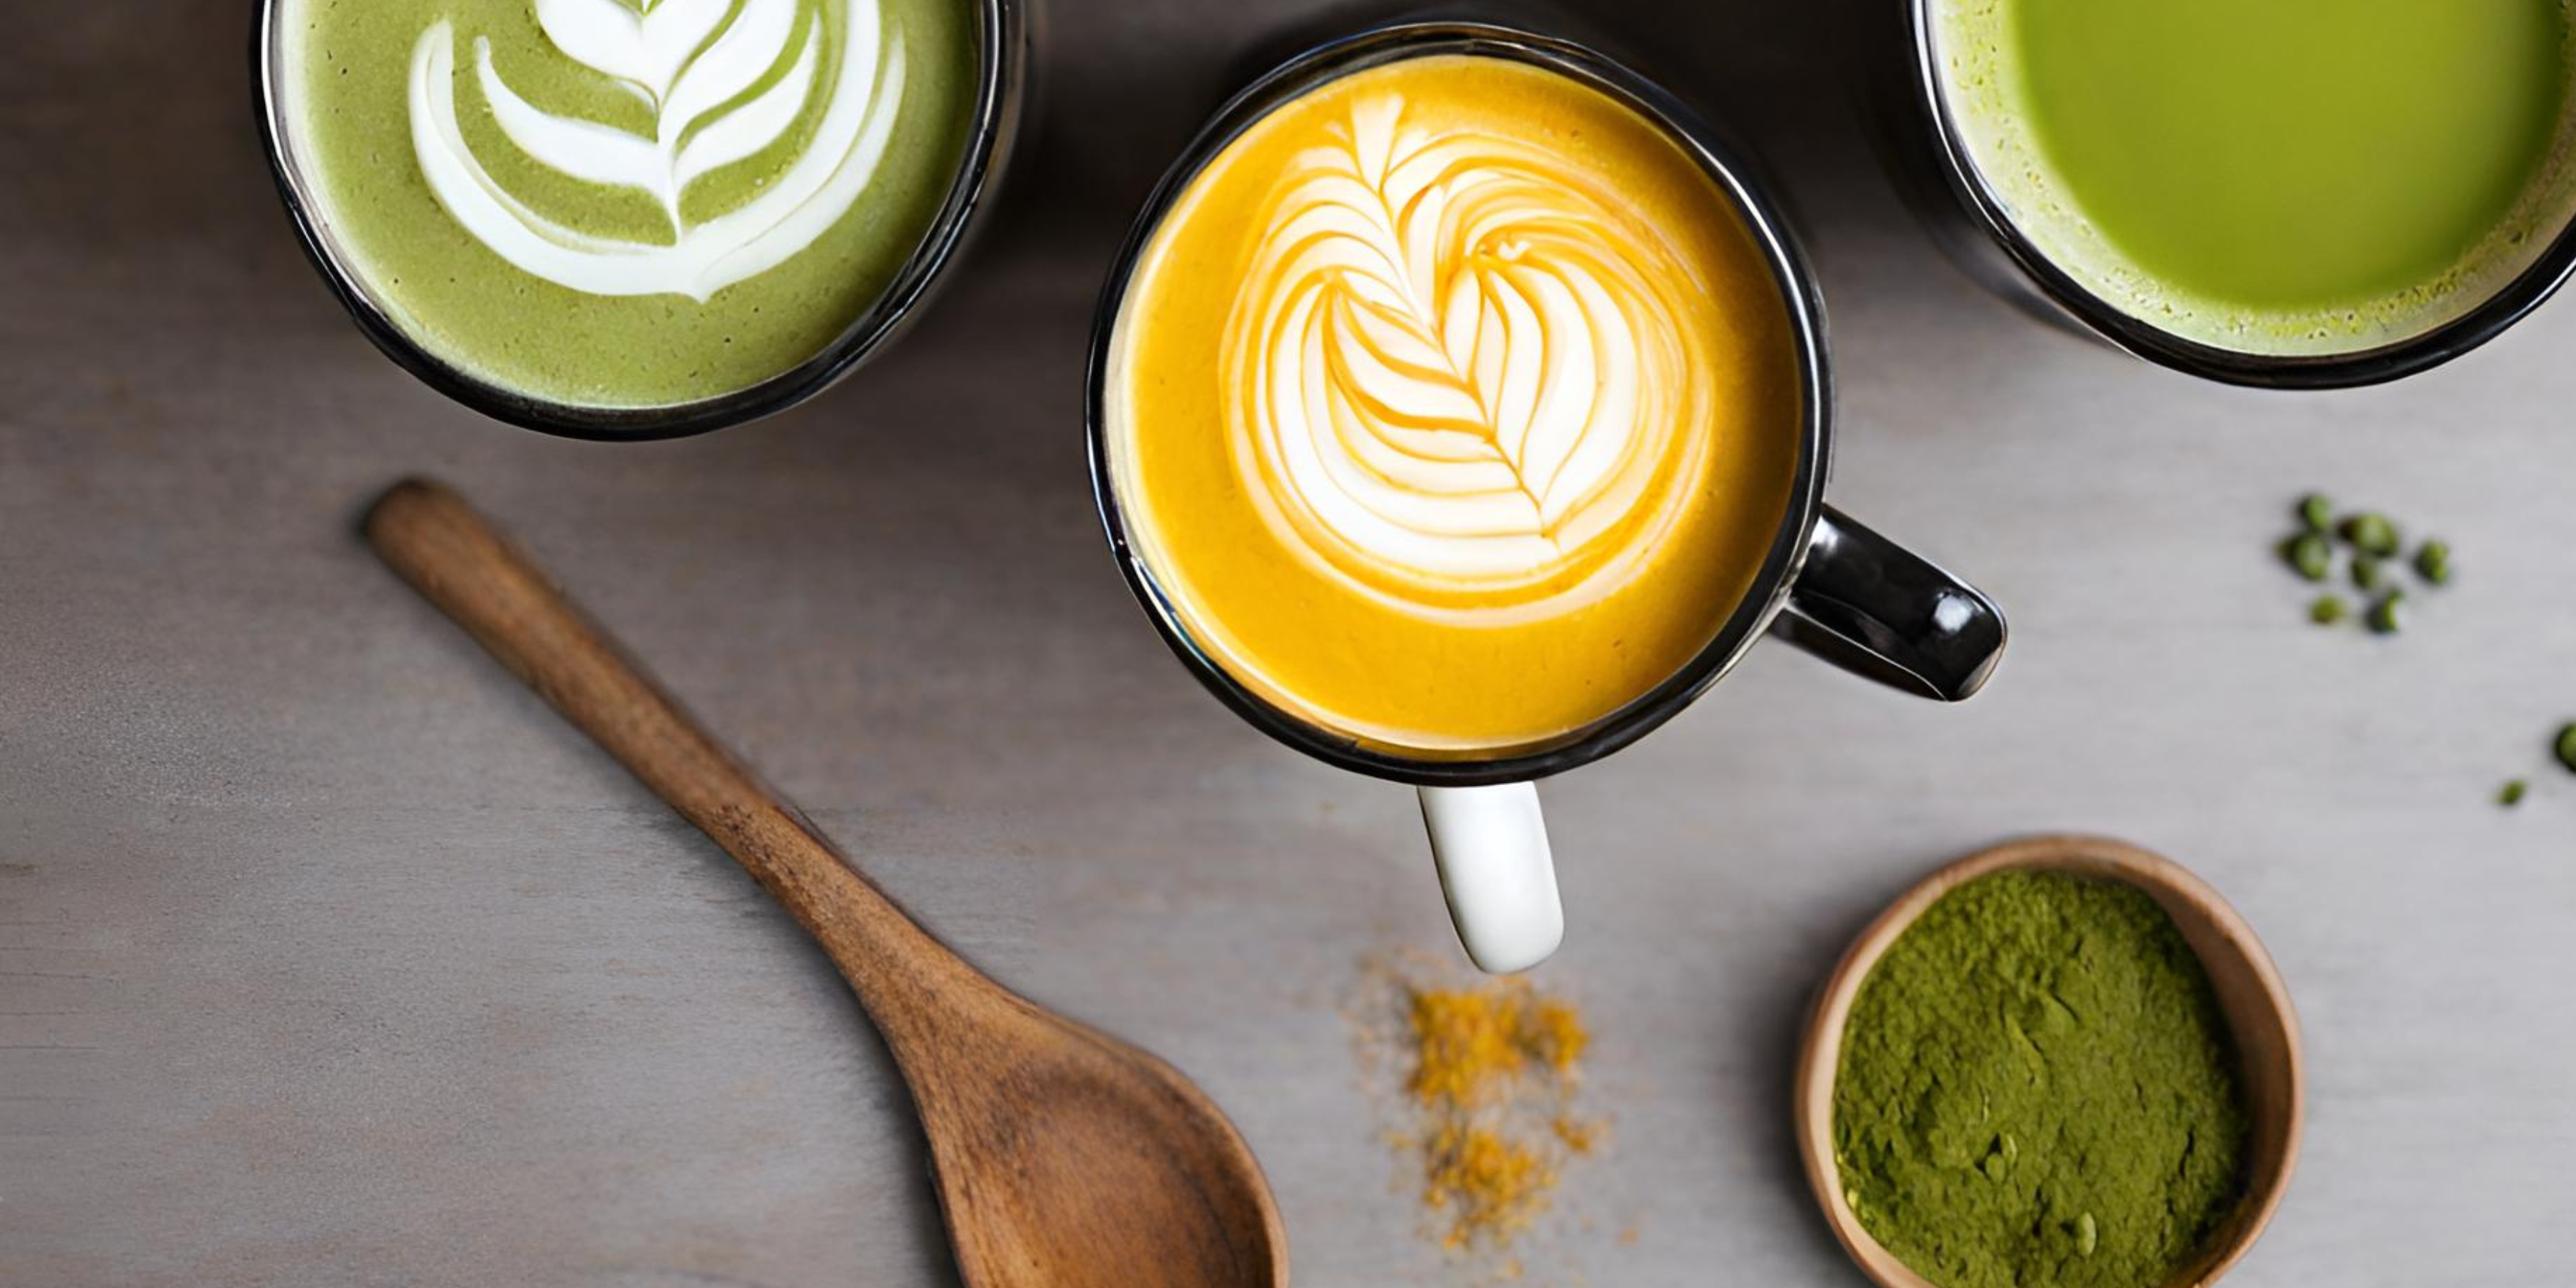 What makes the perfect Latte?